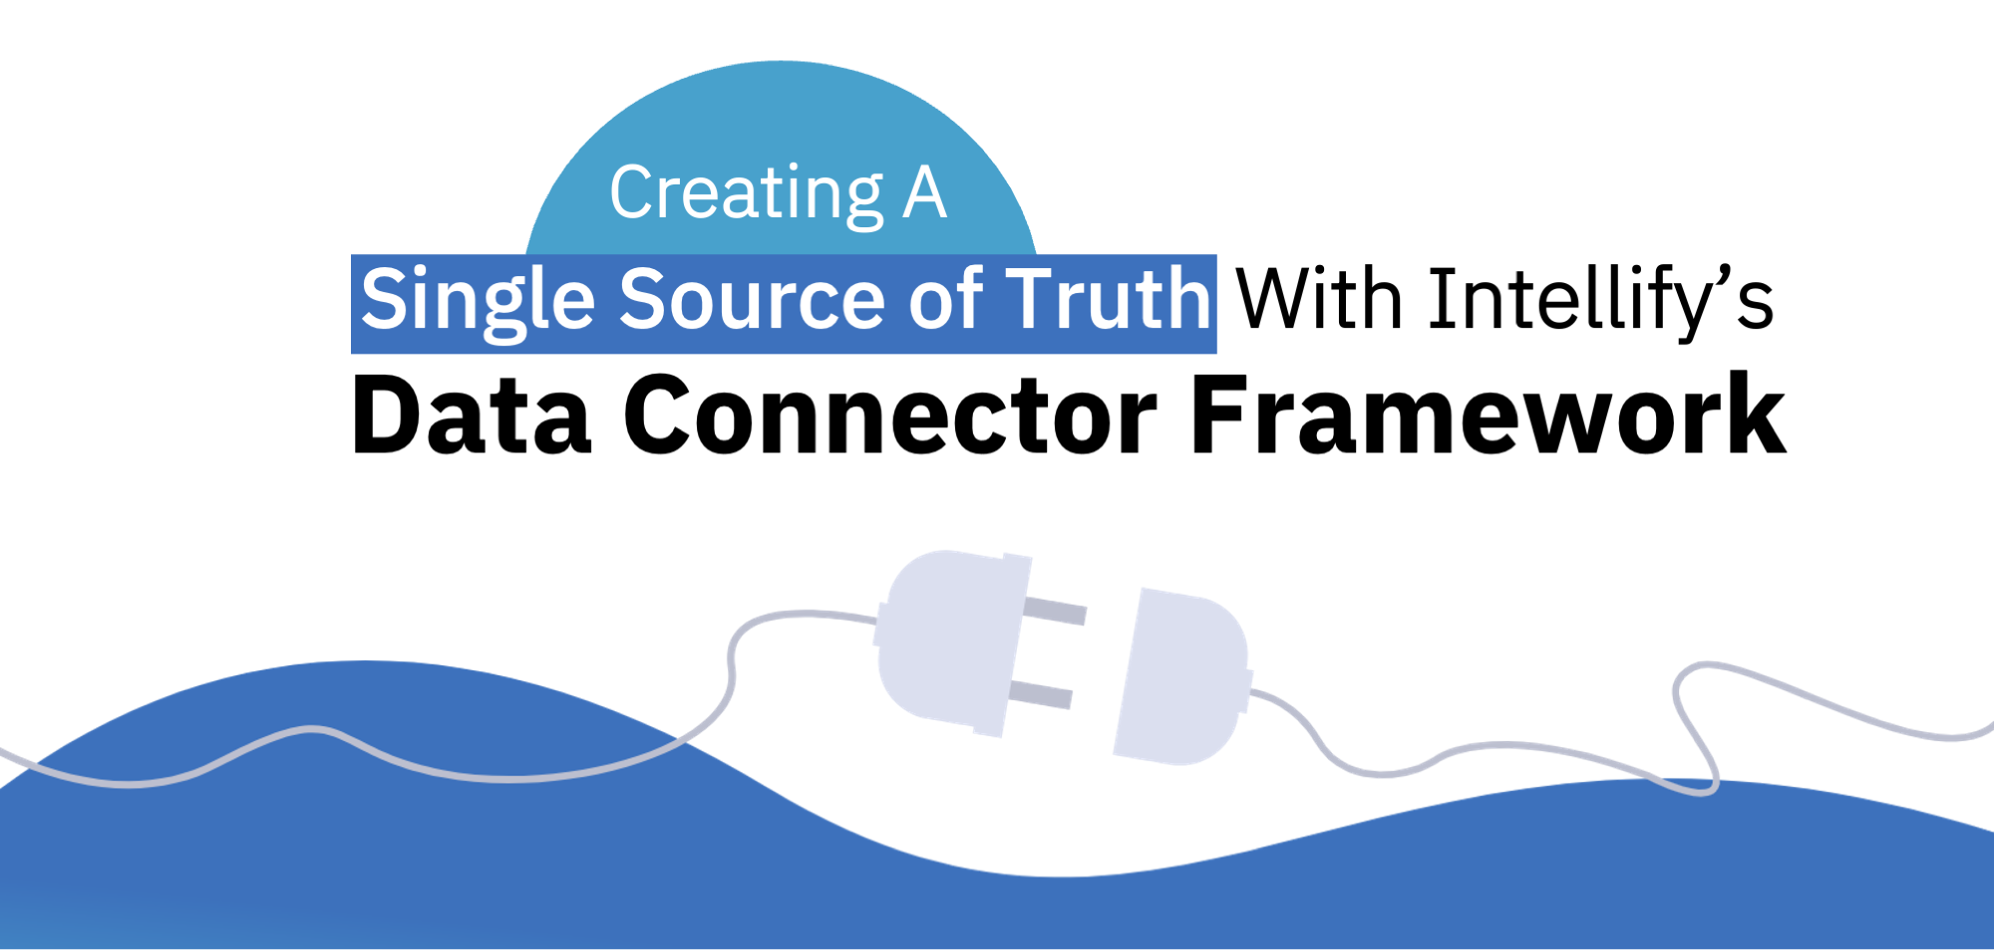 Creating A Single Source of Truth With Intellify’s Data Connector Framework 